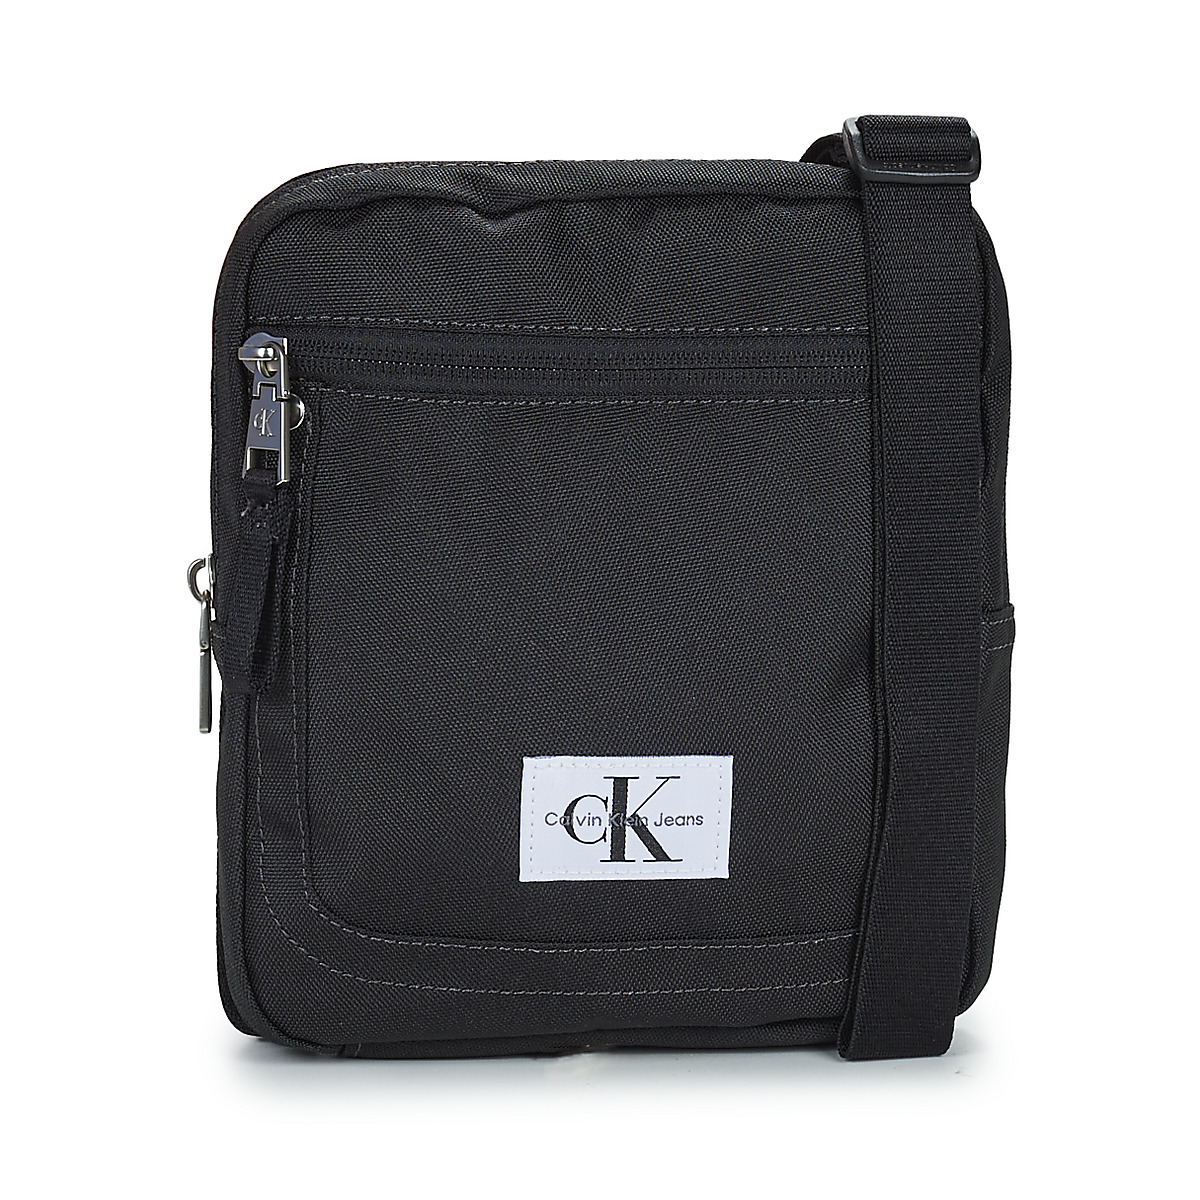 | Jeans Free Calvin Pouches ! / - Bags - Clutches SPORT Black Spartoo delivery Klein REPORTER18 ESSENTIALS Men NET W